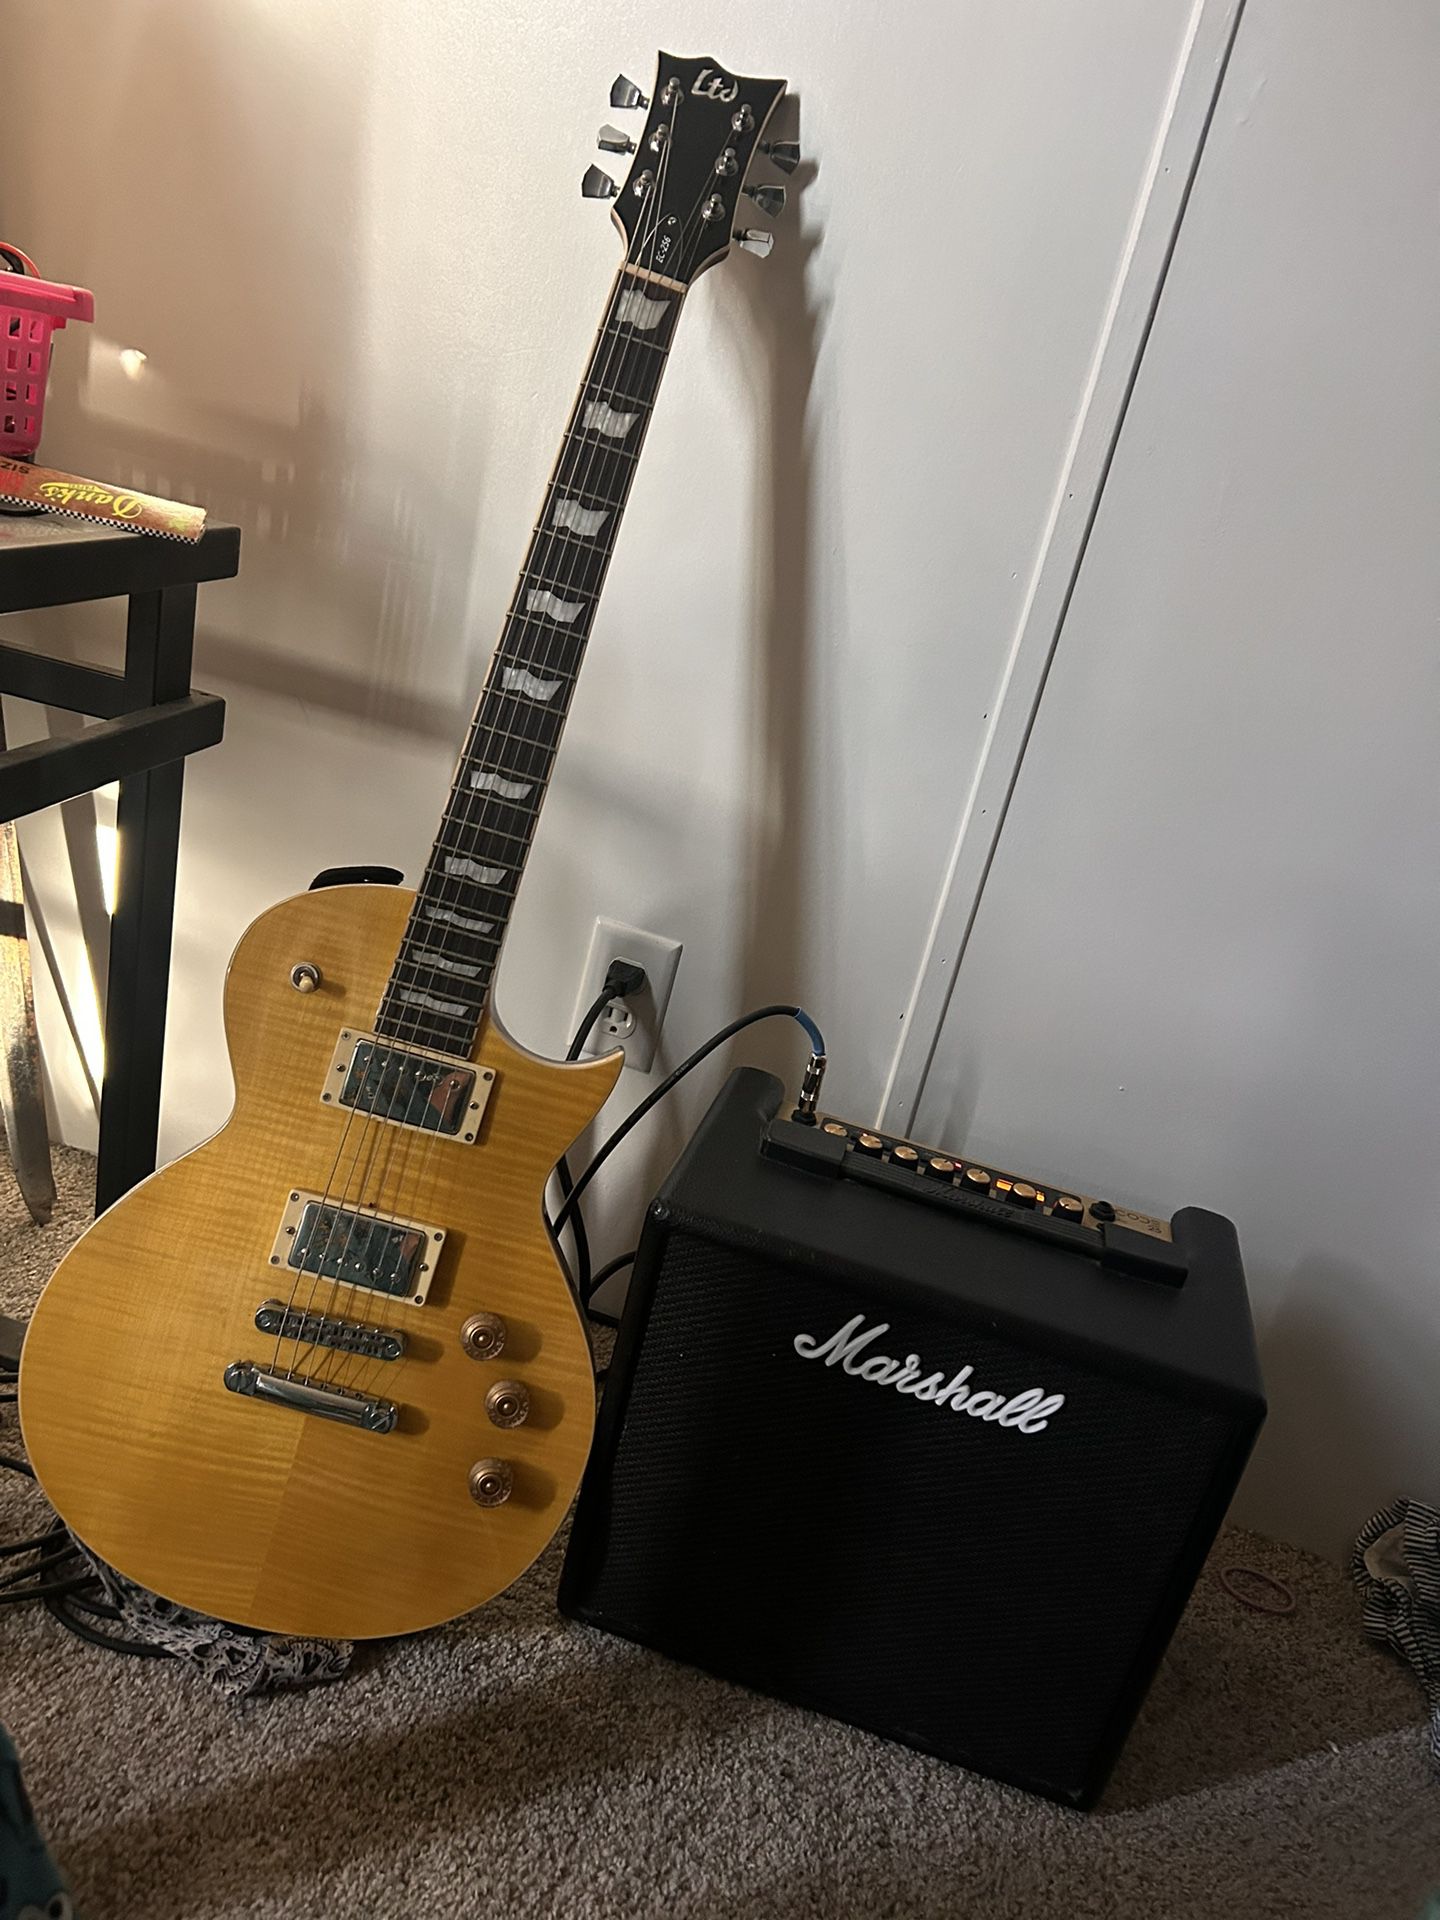 LTD EC-256 And A Marshall Code 25 Amplifier